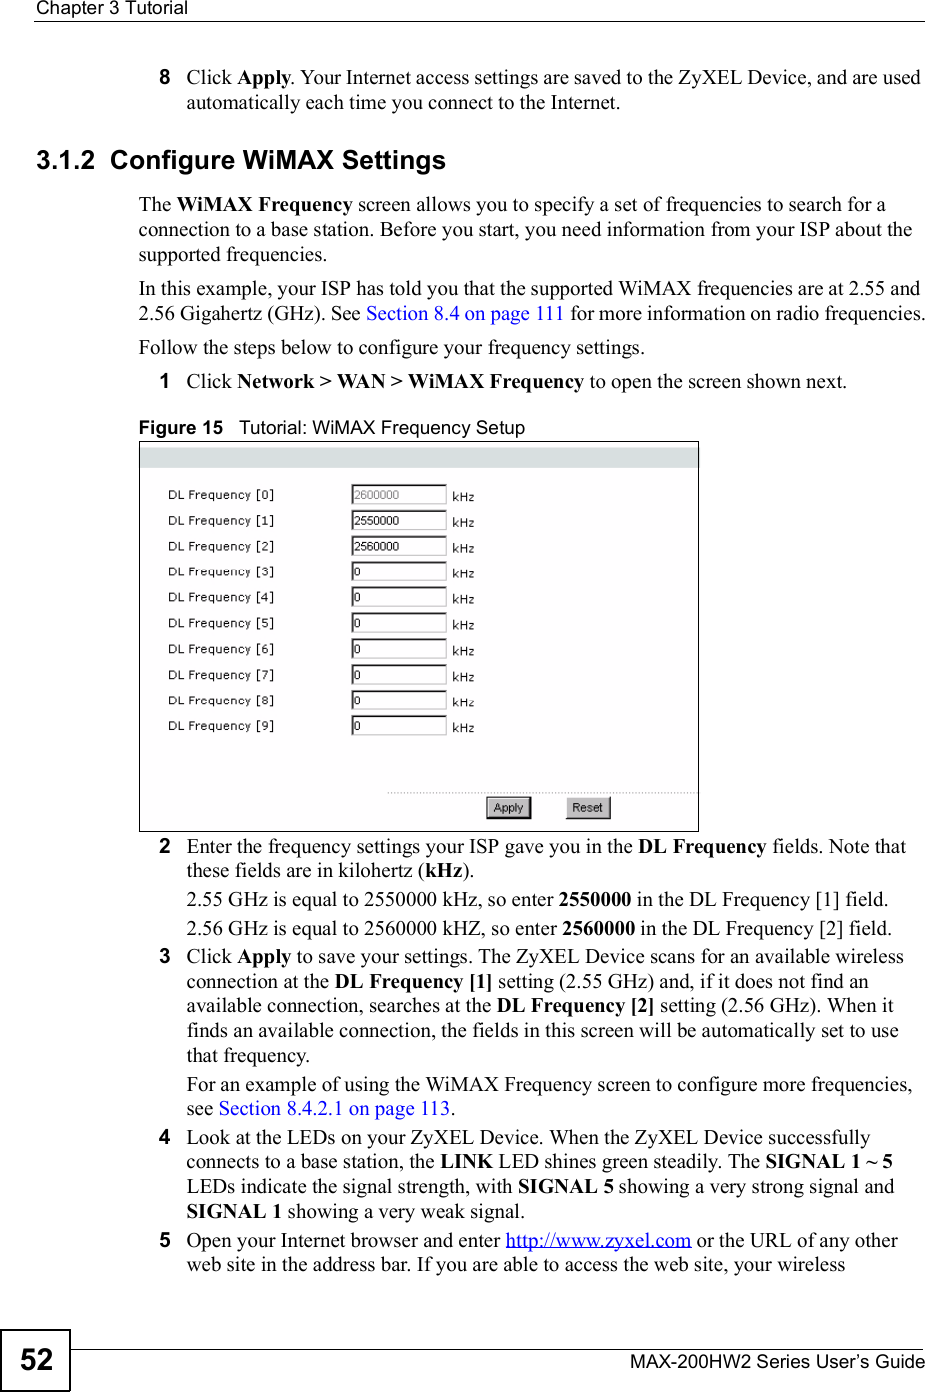 Chapter 3TutorialMAX-200HW2 Series User s Guide528Click Apply. Your Internet access settings are saved to the ZyXEL Device, and are used automatically each time you connect to the Internet.3.1.2  Configure WiMAX SettingsThe WiMAX Frequency screen allows you to specify a set of frequencies to search for a connection to a base station. Before you start, you need information from your ISP about the supported frequencies. In this example, your ISP has told you that the supported WiMAX frequencies are at 2.55 and 2.56 Gigahertz (GHz). See Section 8.4 on page 111 for more information on radio frequencies.Follow the steps below to configure your frequency settings.1Click Network &gt; WAN &gt; WiMAX Frequency to open the screen shown next.Figure 15   Tutorial: WiMAX Frequency Setup2Enter the frequency settings your ISP gave you in the DL Frequency fields. Note that these fields are in kilohertz (kHz).2.55 GHz is equal to 2550000 kHz, so enter 2550000 in the DL Frequency [1] field.2.56 GHz is equal to 2560000 kHZ, so enter 2560000 in the DL Frequency [2] field.3Click Apply to save your settings. The ZyXEL Device scans for an available wireless connection at the DL Frequency [1] setting (2.55 GHz) and, if it does not find an available connection, searches at the DL Frequency [2] setting (2.56 GHz). When it finds an available connection, the fields in this screen will be automatically set to use that frequency.For an example of using the WiMAX Frequency screen to configure more frequencies, see Section 8.4.2.1 on page 113.4Look at the LEDs on your ZyXEL Device. When the ZyXEL Device successfully connects to a base station, the LINK LED shines green steadily. The SIGNAL 1 ~ 5LEDs indicate the signal strength, with SIGNAL 5 showing a very strong signal and SIGNAL 1 showing a very weak signal.5Open your Internet browser and enter http://www.zyxel.com or the URL of any other web site in the address bar. If you are able to access the web site, your wireless 